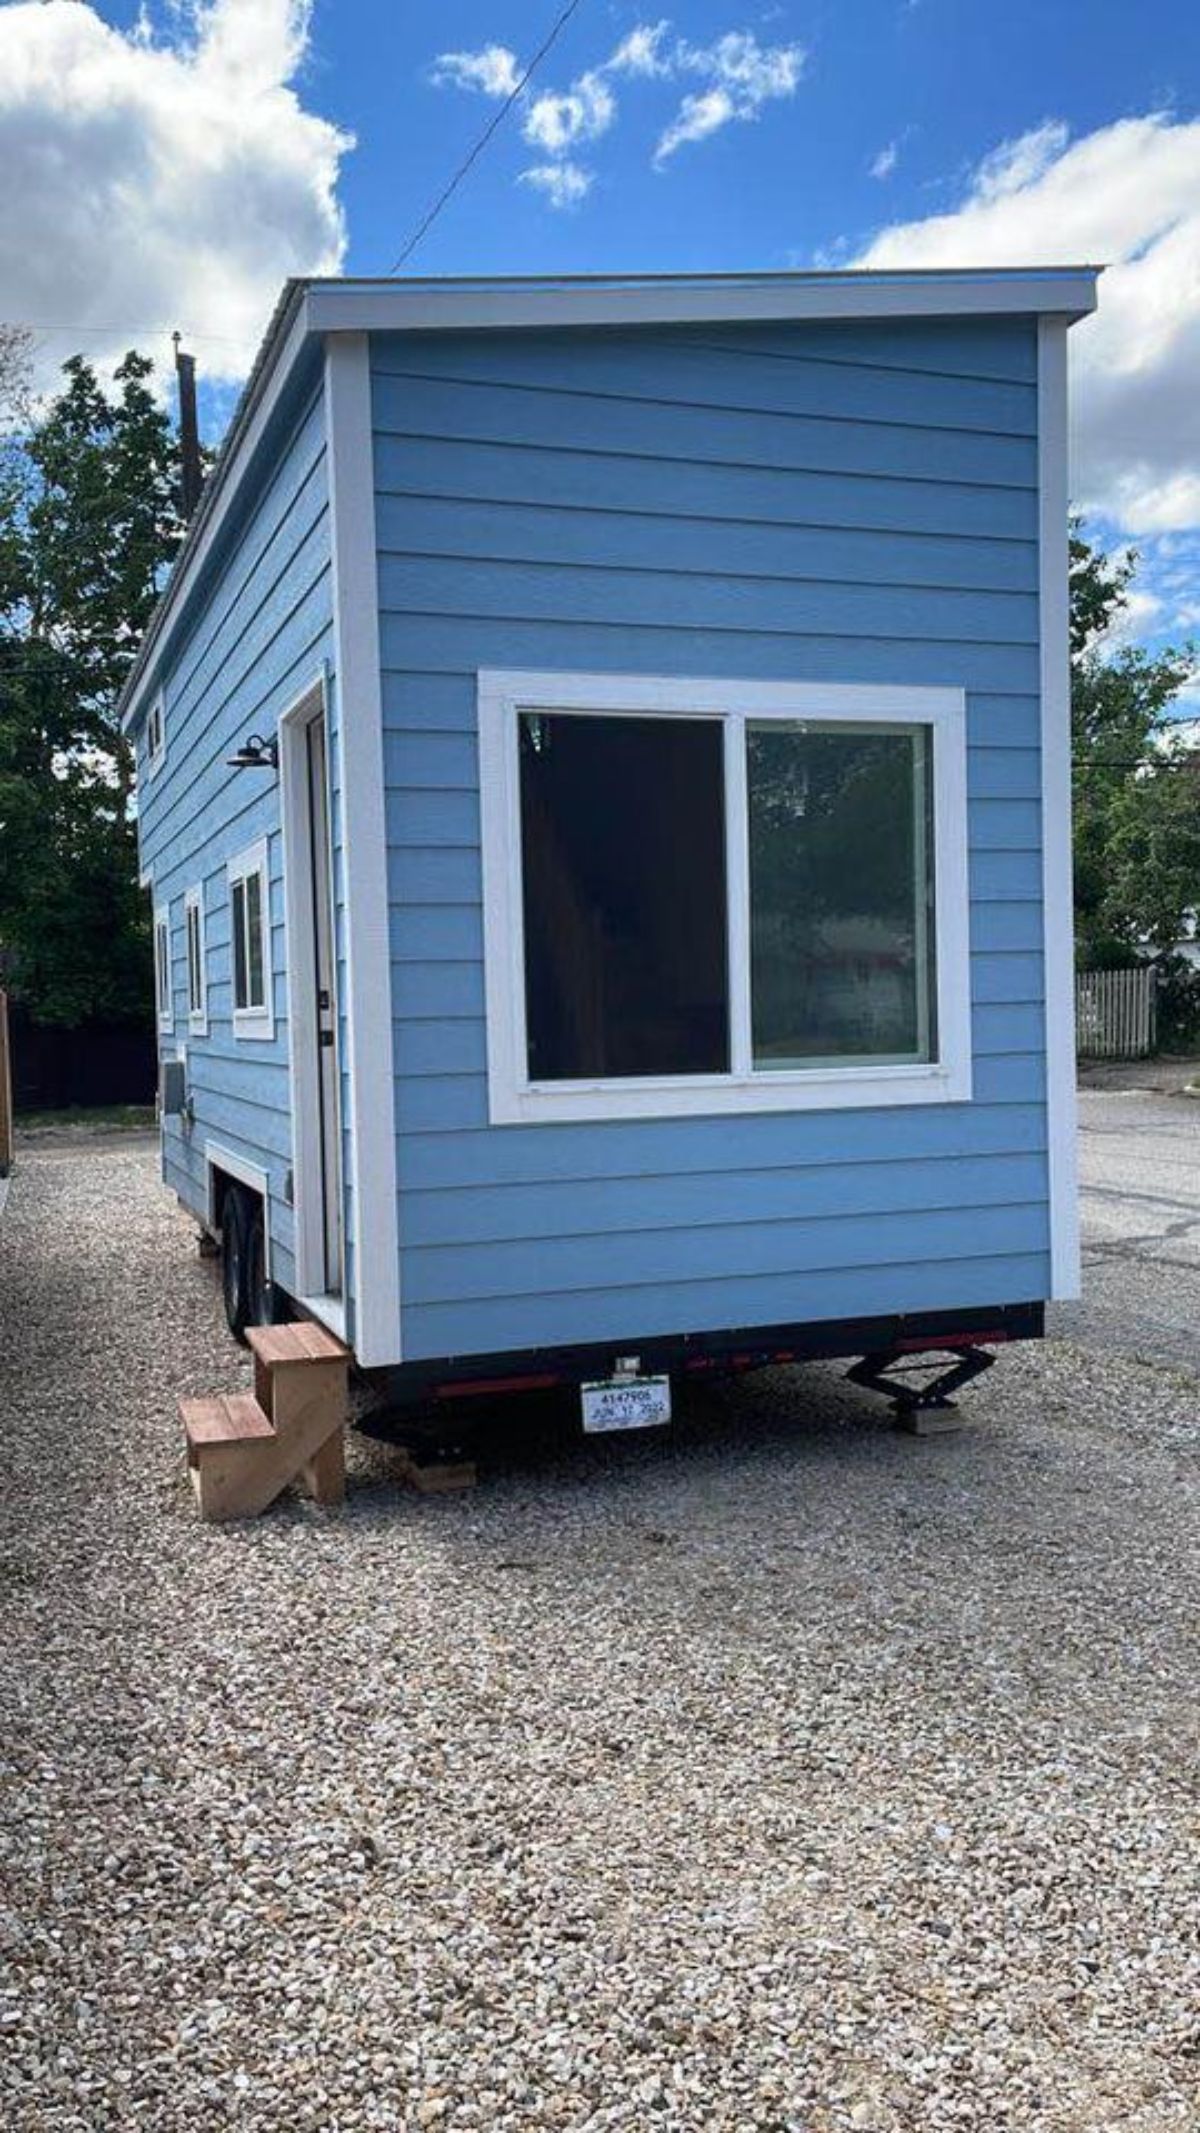 Large windows and blue coloured exteriors of 20’ Tiny House